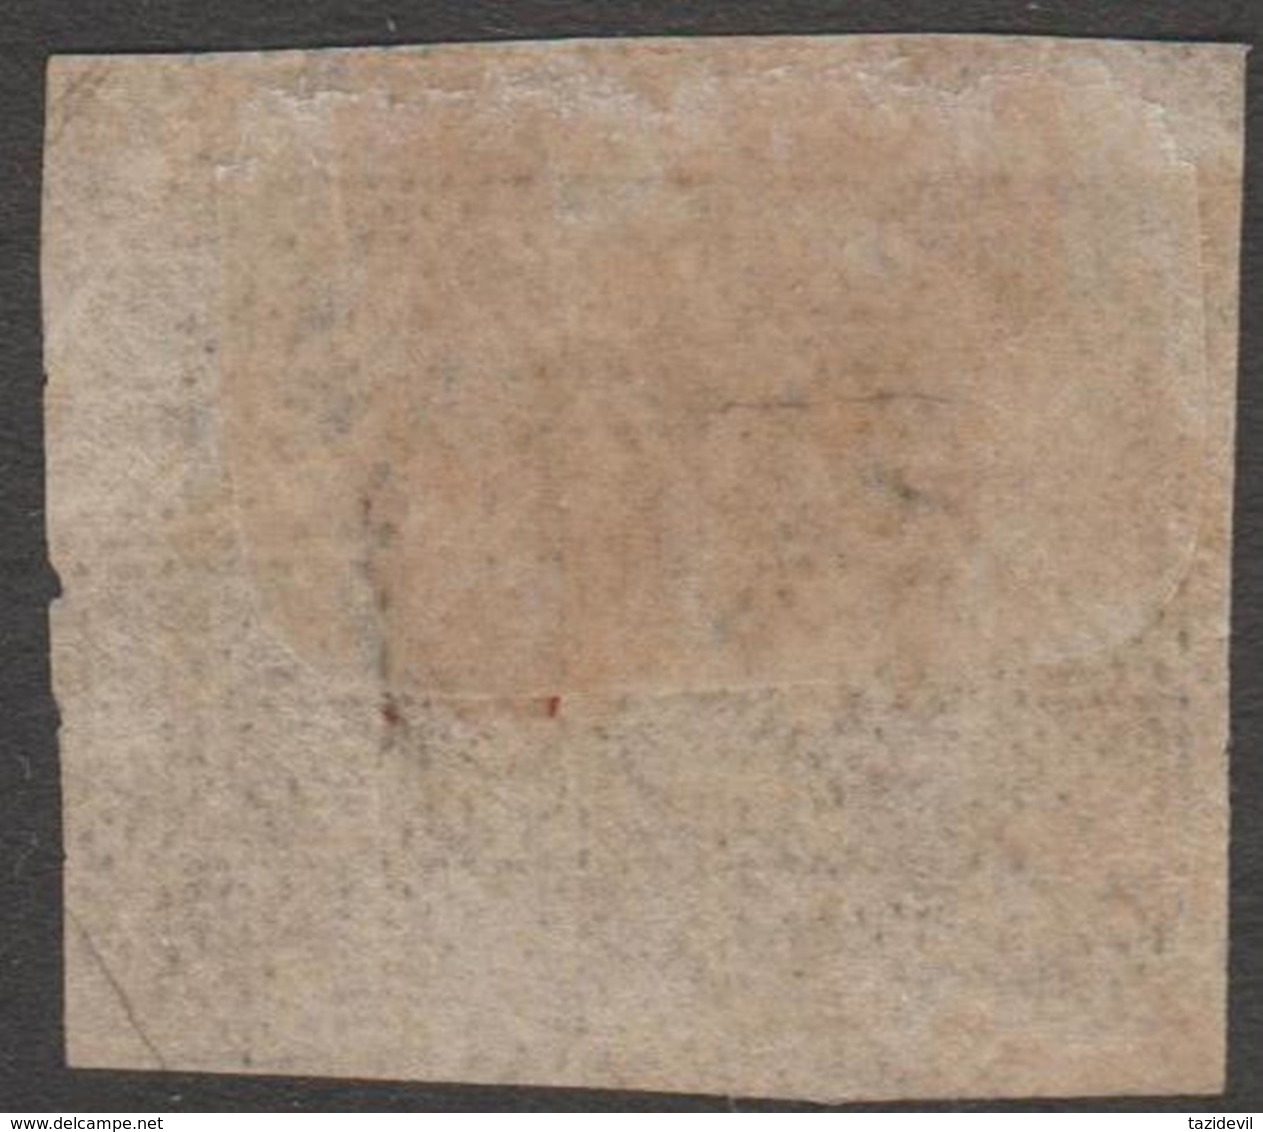 BRAZIL - 1850 30r Numeral. Scott 23. Looks To Be Mint With Gum - Nuevos